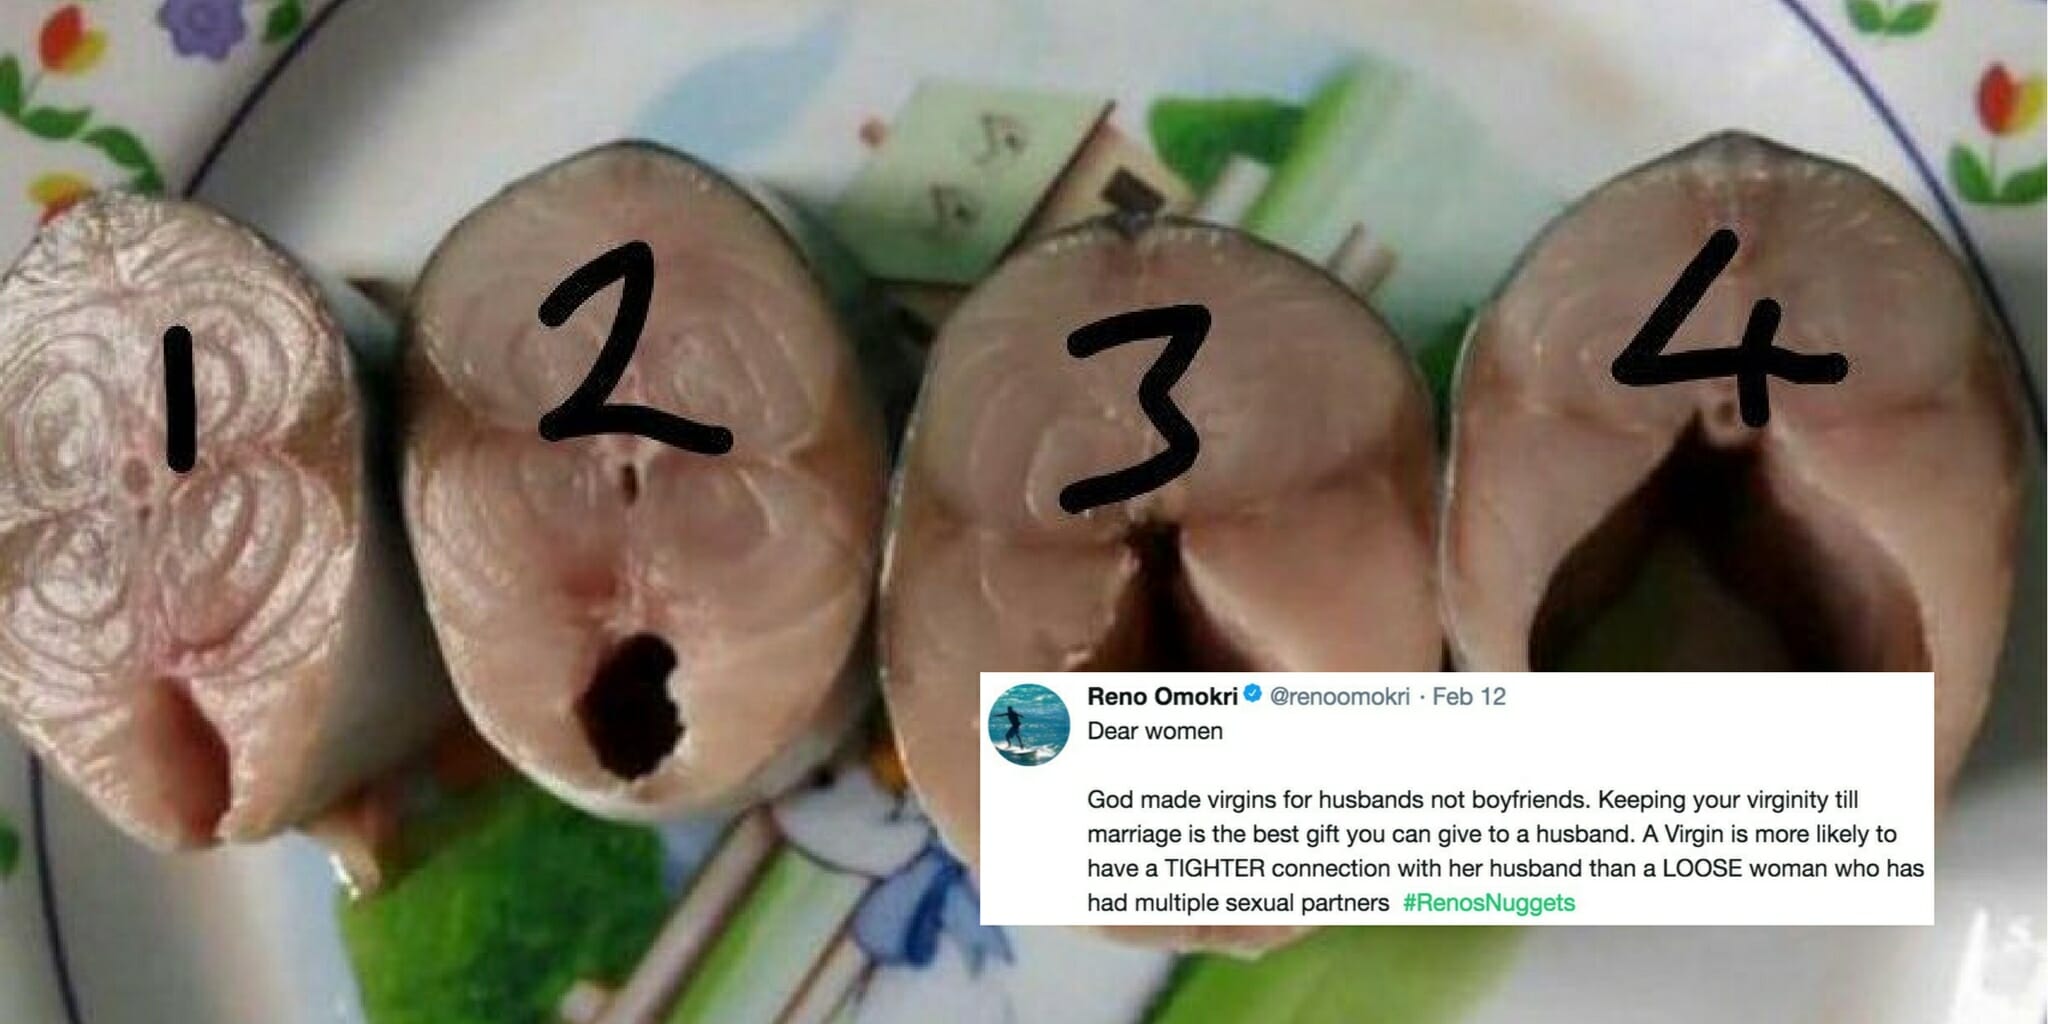 Man Uses Fish Filets To Model Stretchy Vaginas, Gets Grilled By Twitter image